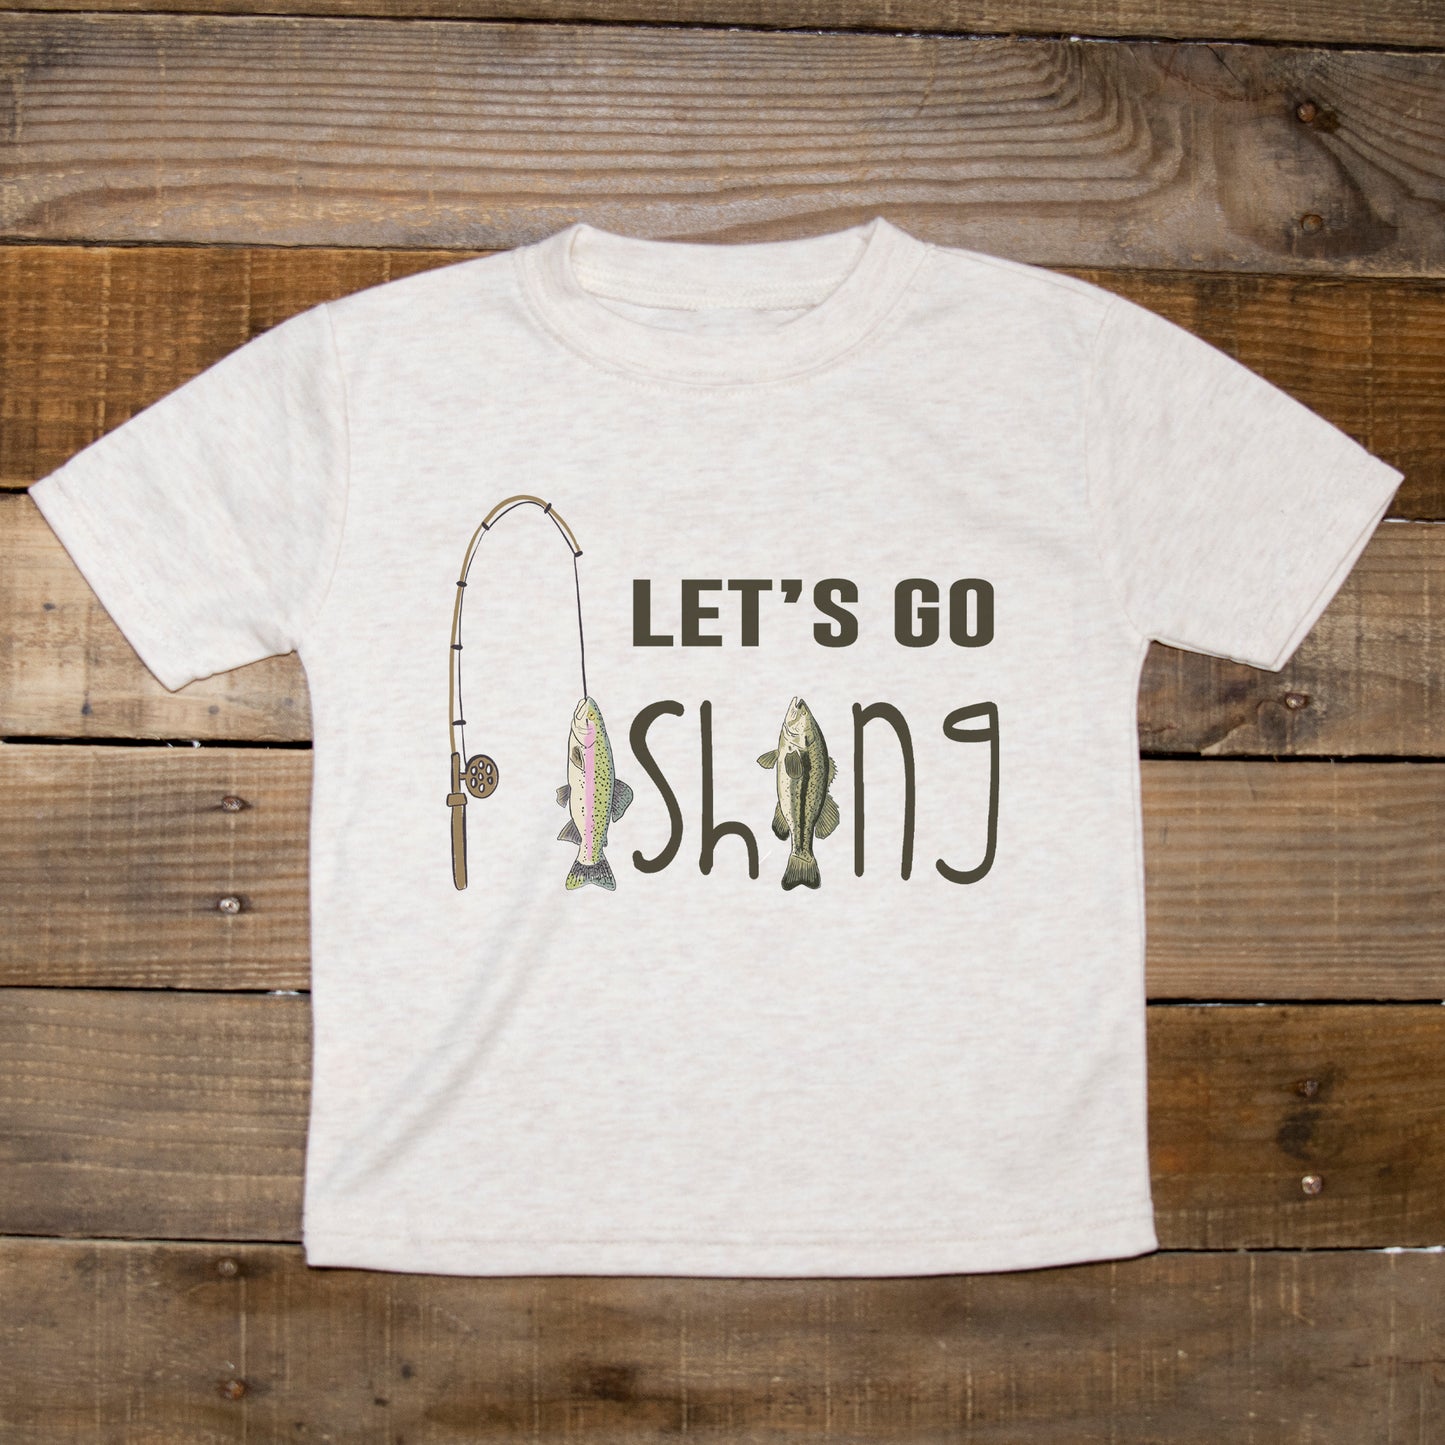 "Let's go fishing" Toddler/Youth Summer shirt